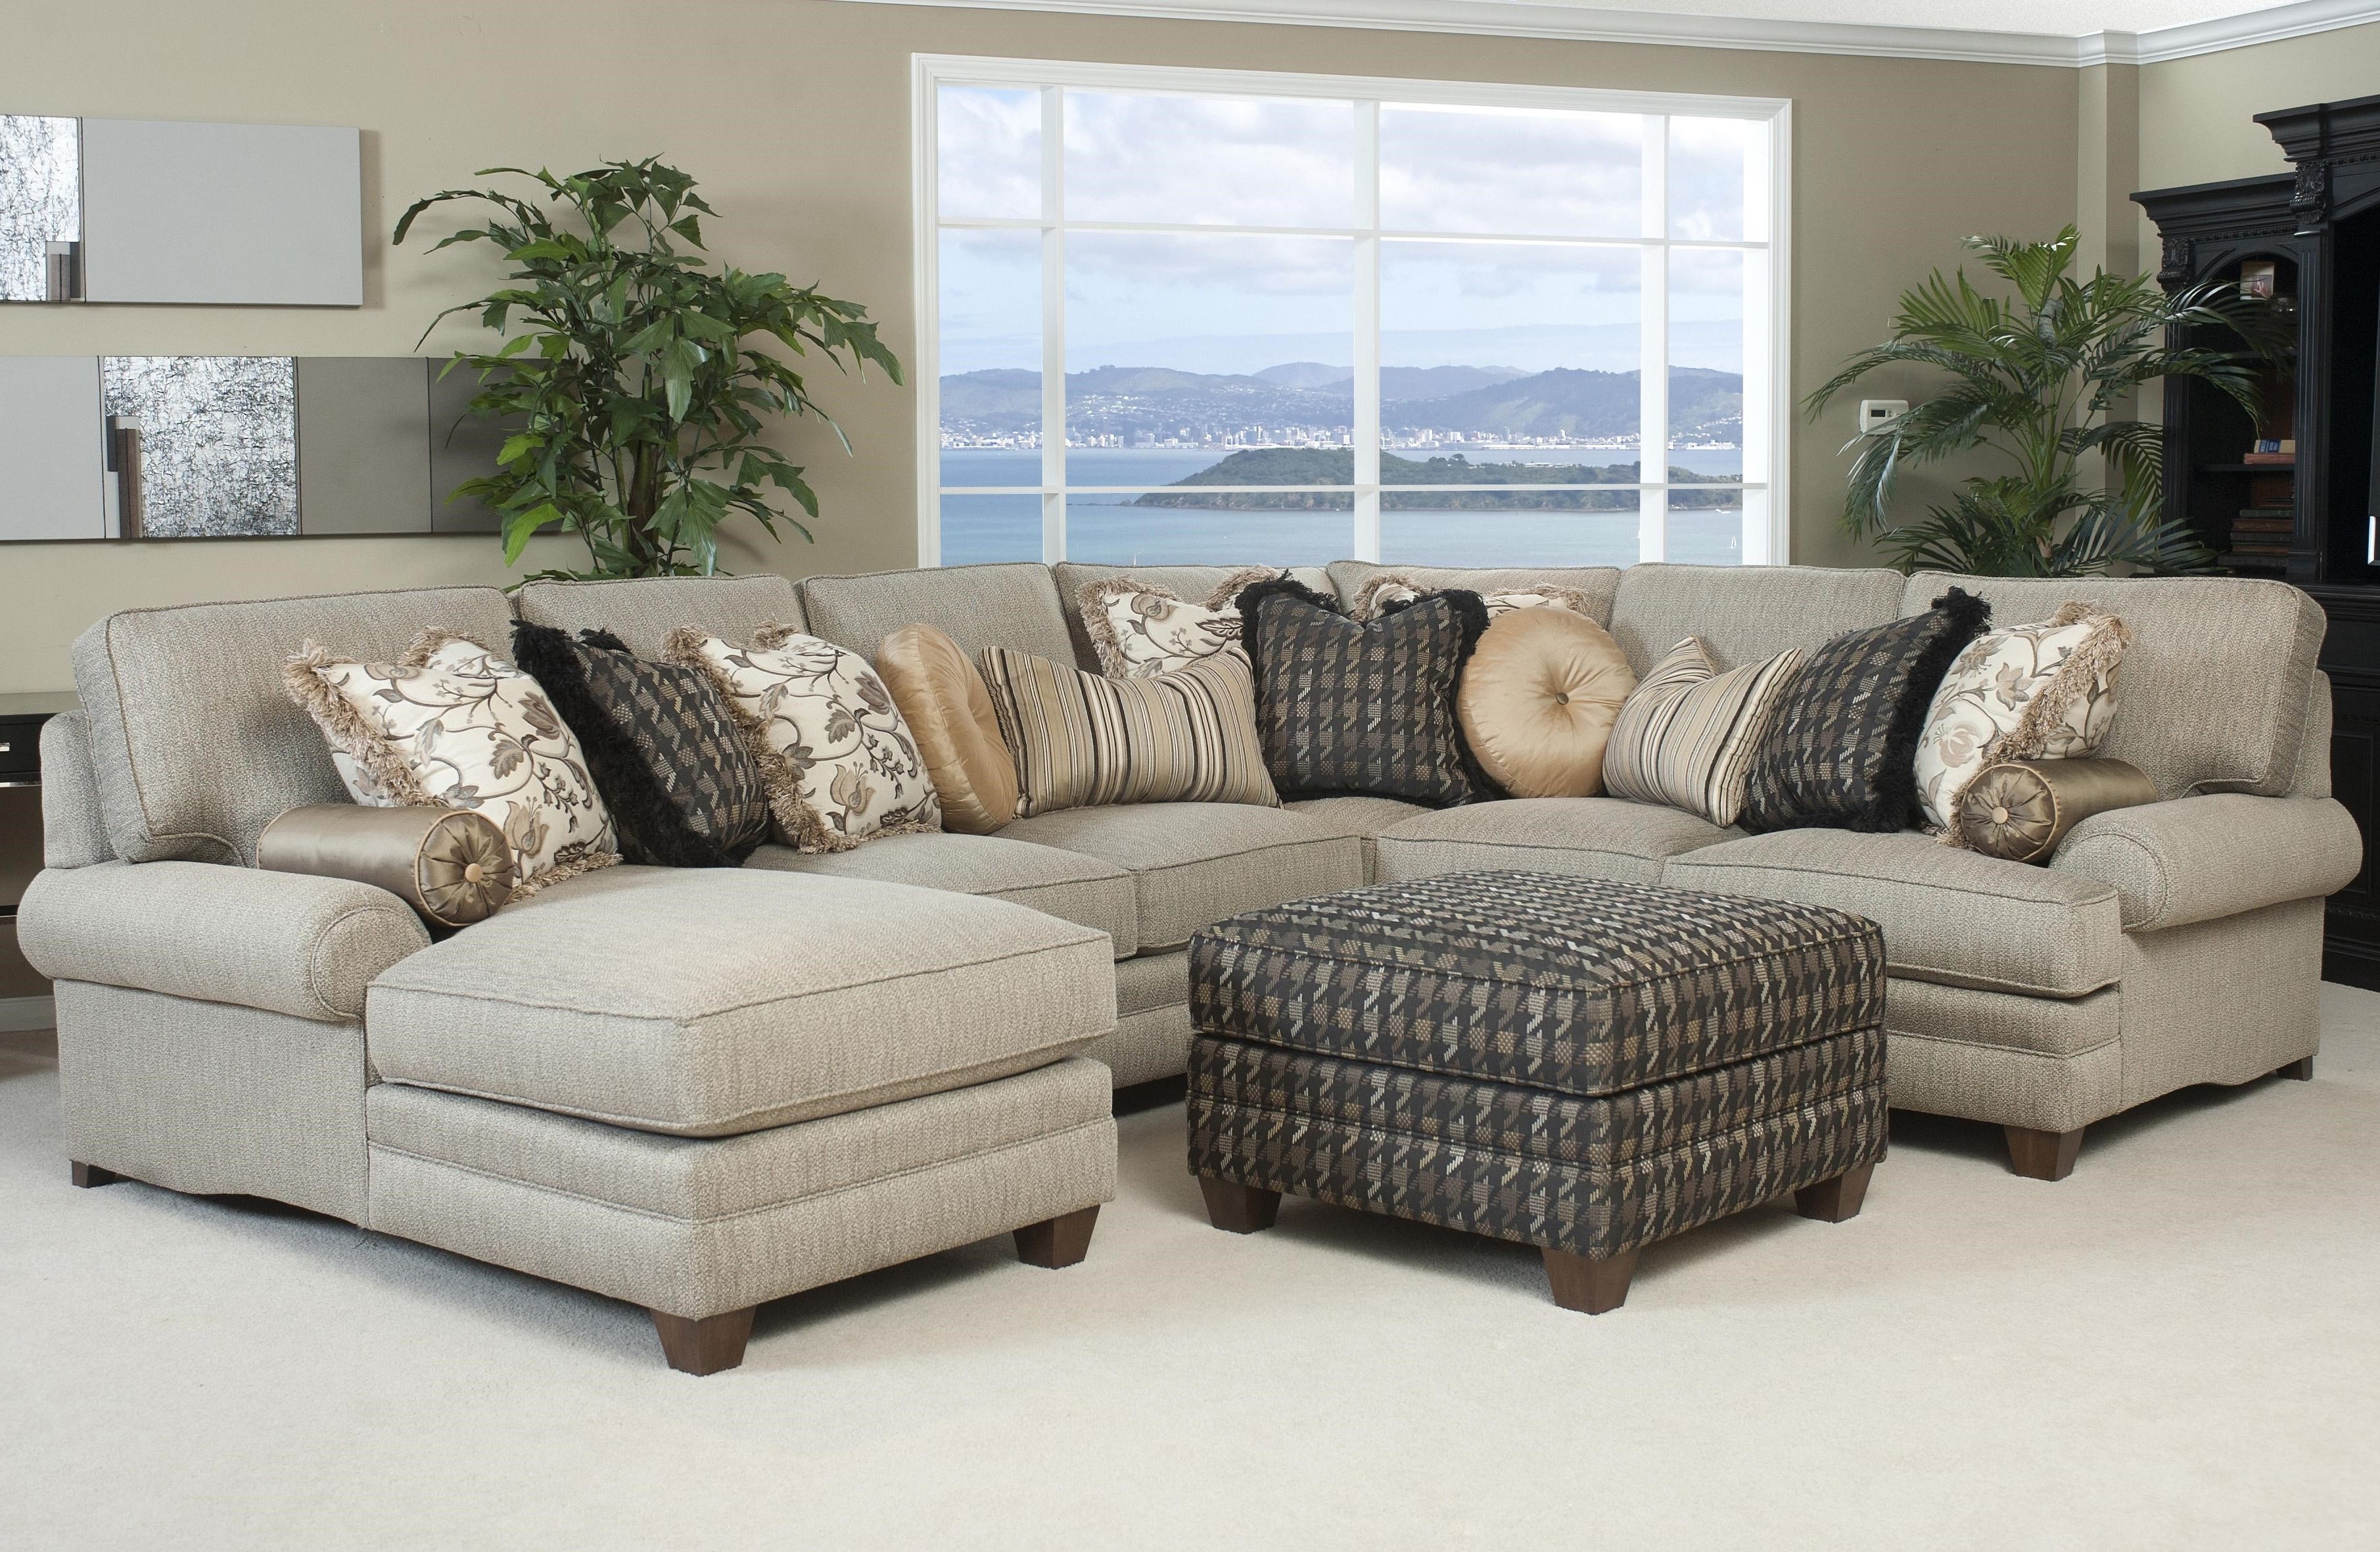 2019 Murfreesboro Tn Sectional Sofas Throughout Sofas & Sectionals Contemporary Grey Sectional Sofa Chaise Tufted (View 6 of 20)